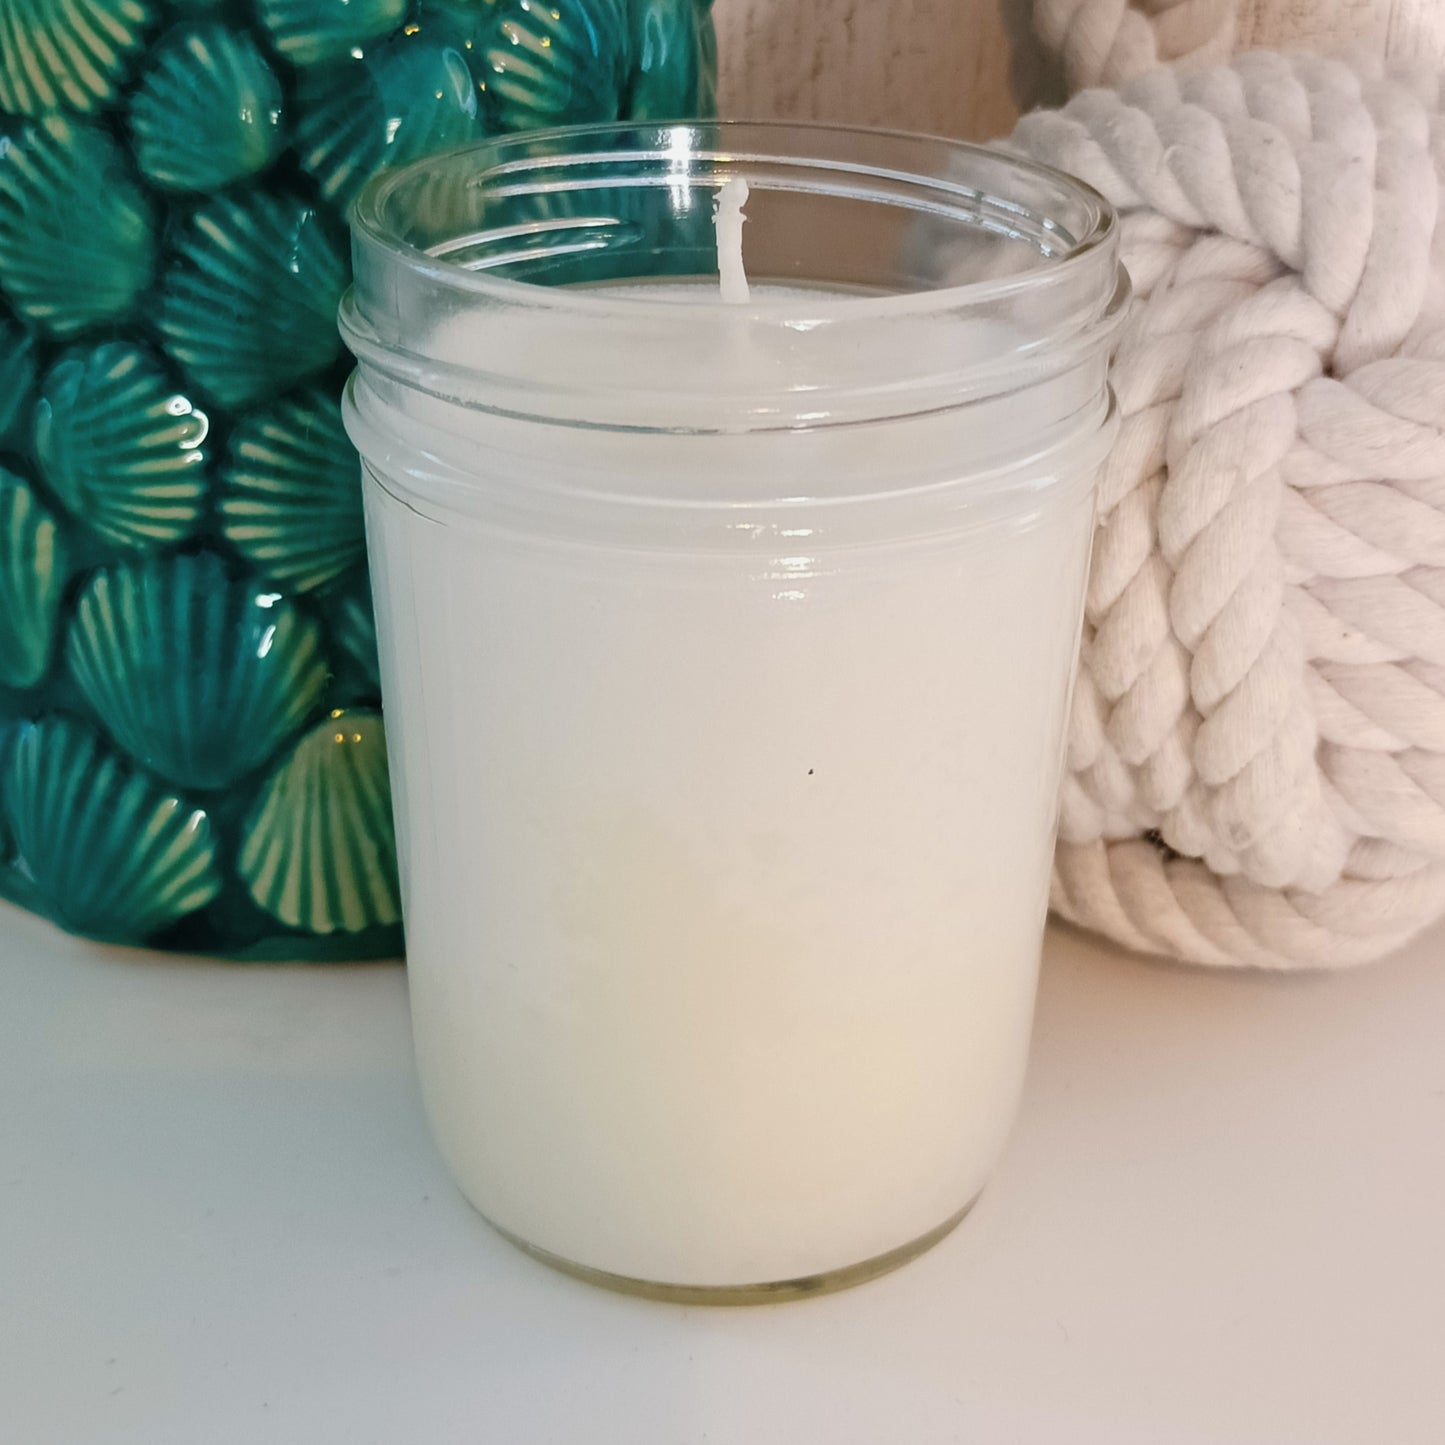 Sun and Sand Soy Candle